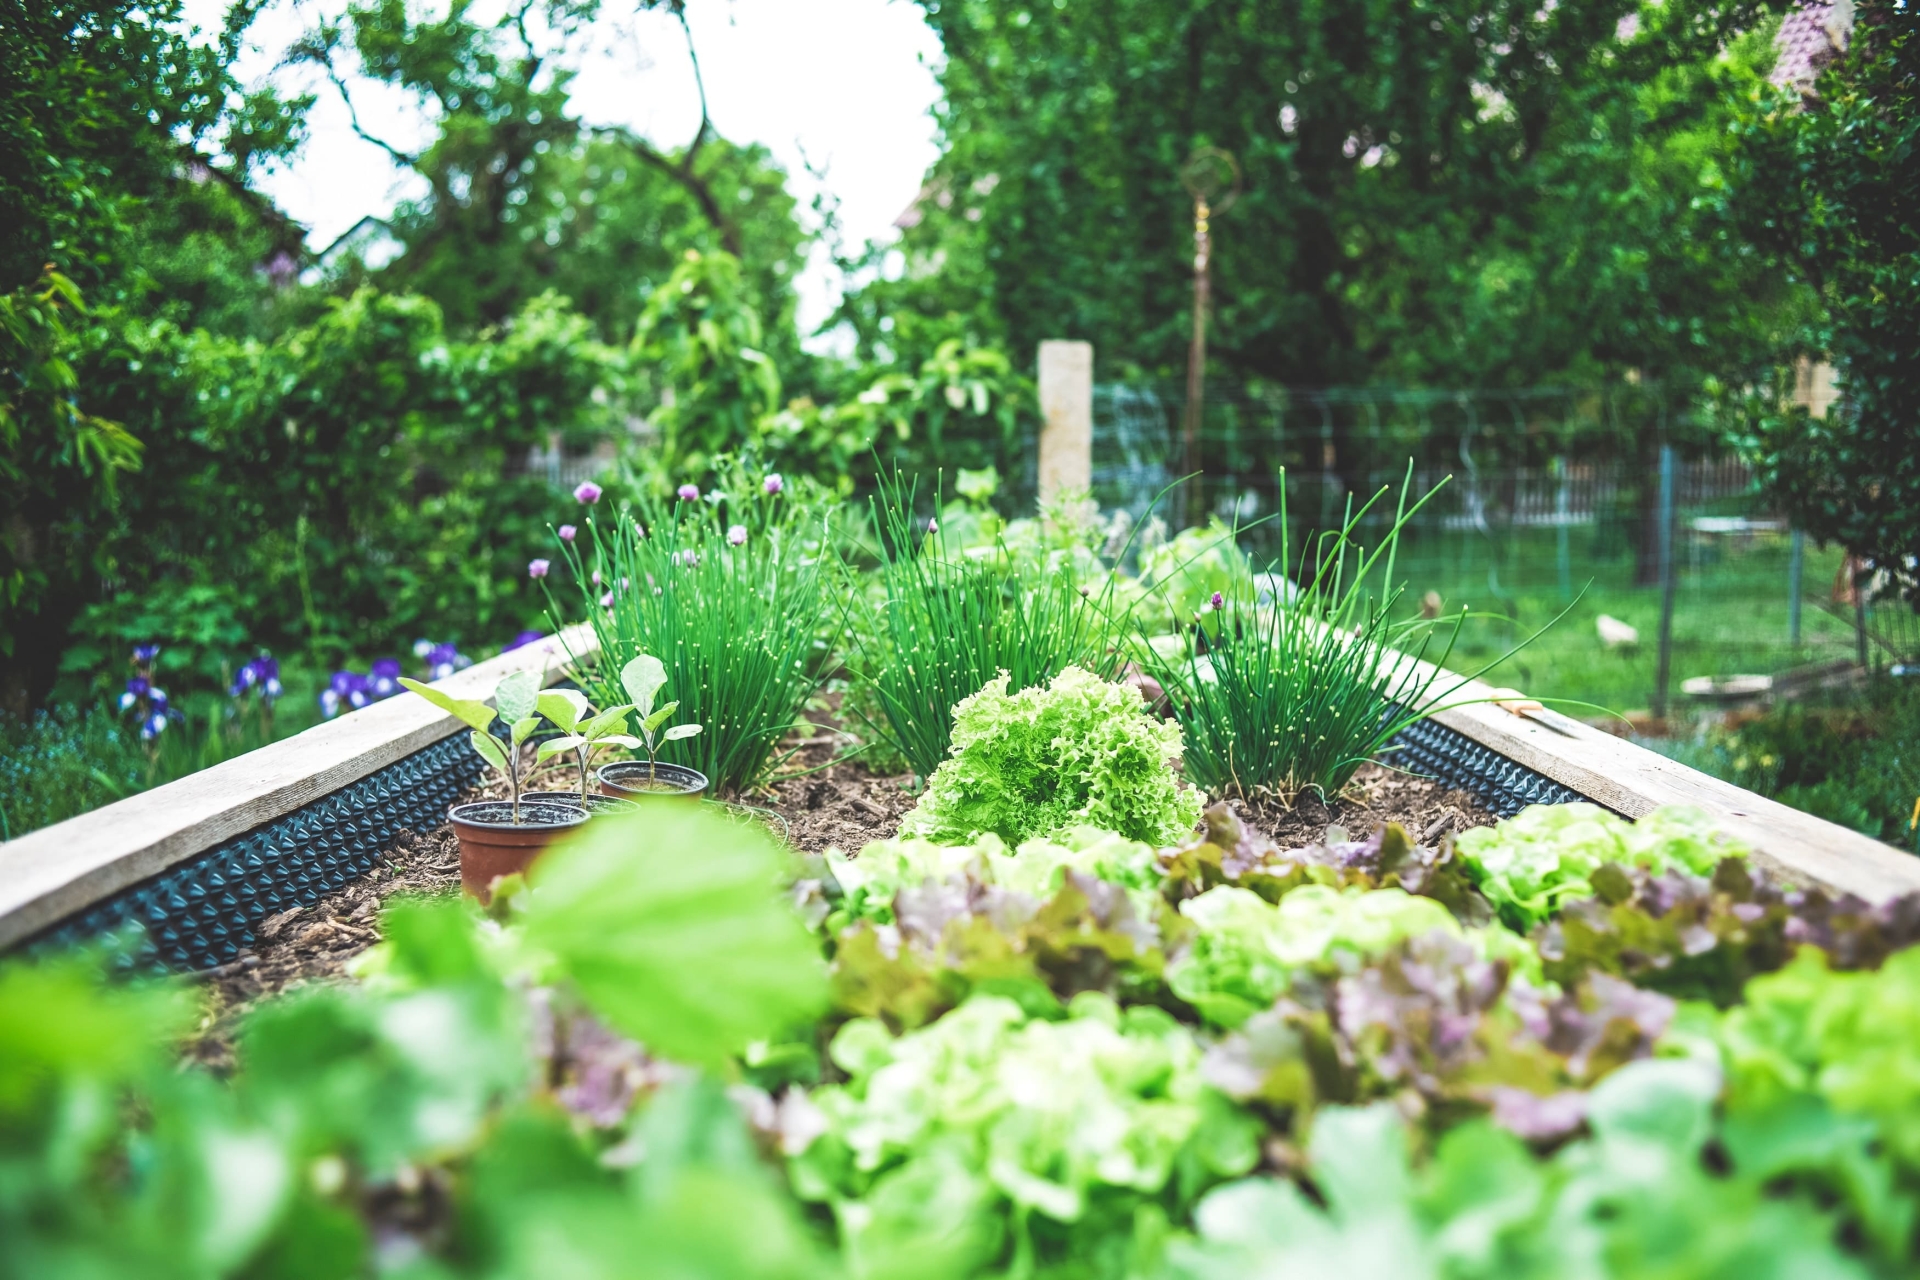 Urban Gardening: Self-sufficiency in the City